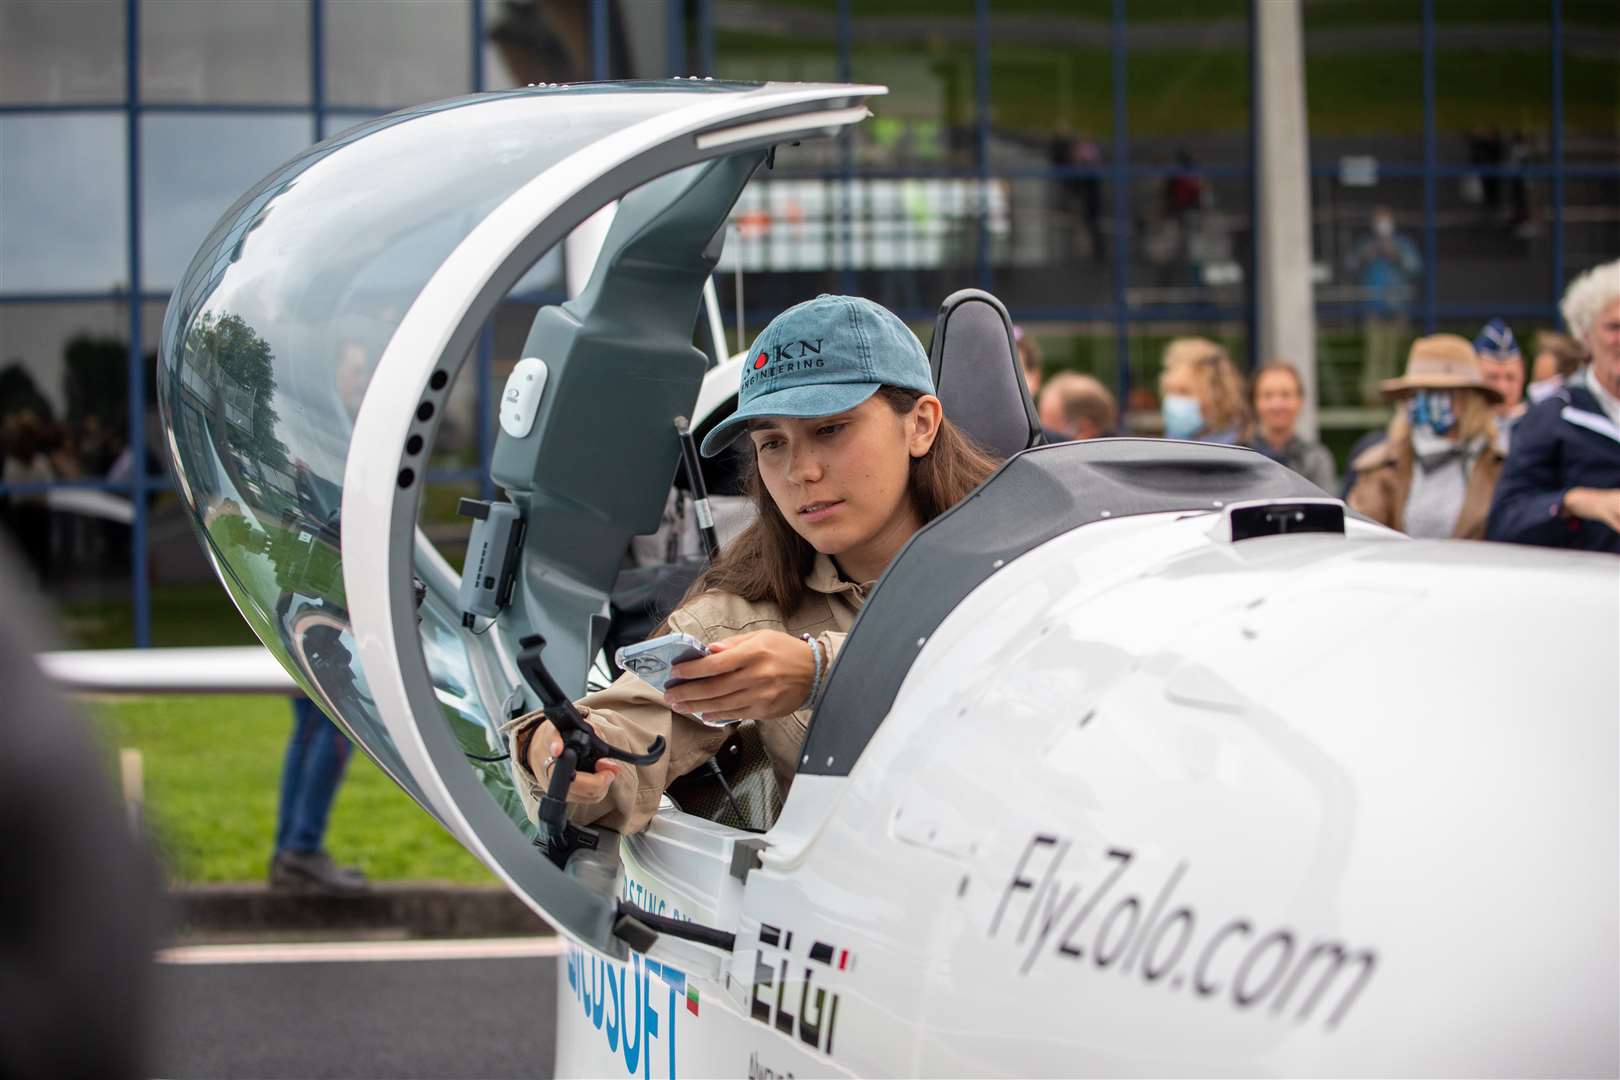 Zara leaving Kortijk-Wevelgem Airport in Belgium which will also act as the finishing point for her attempt.